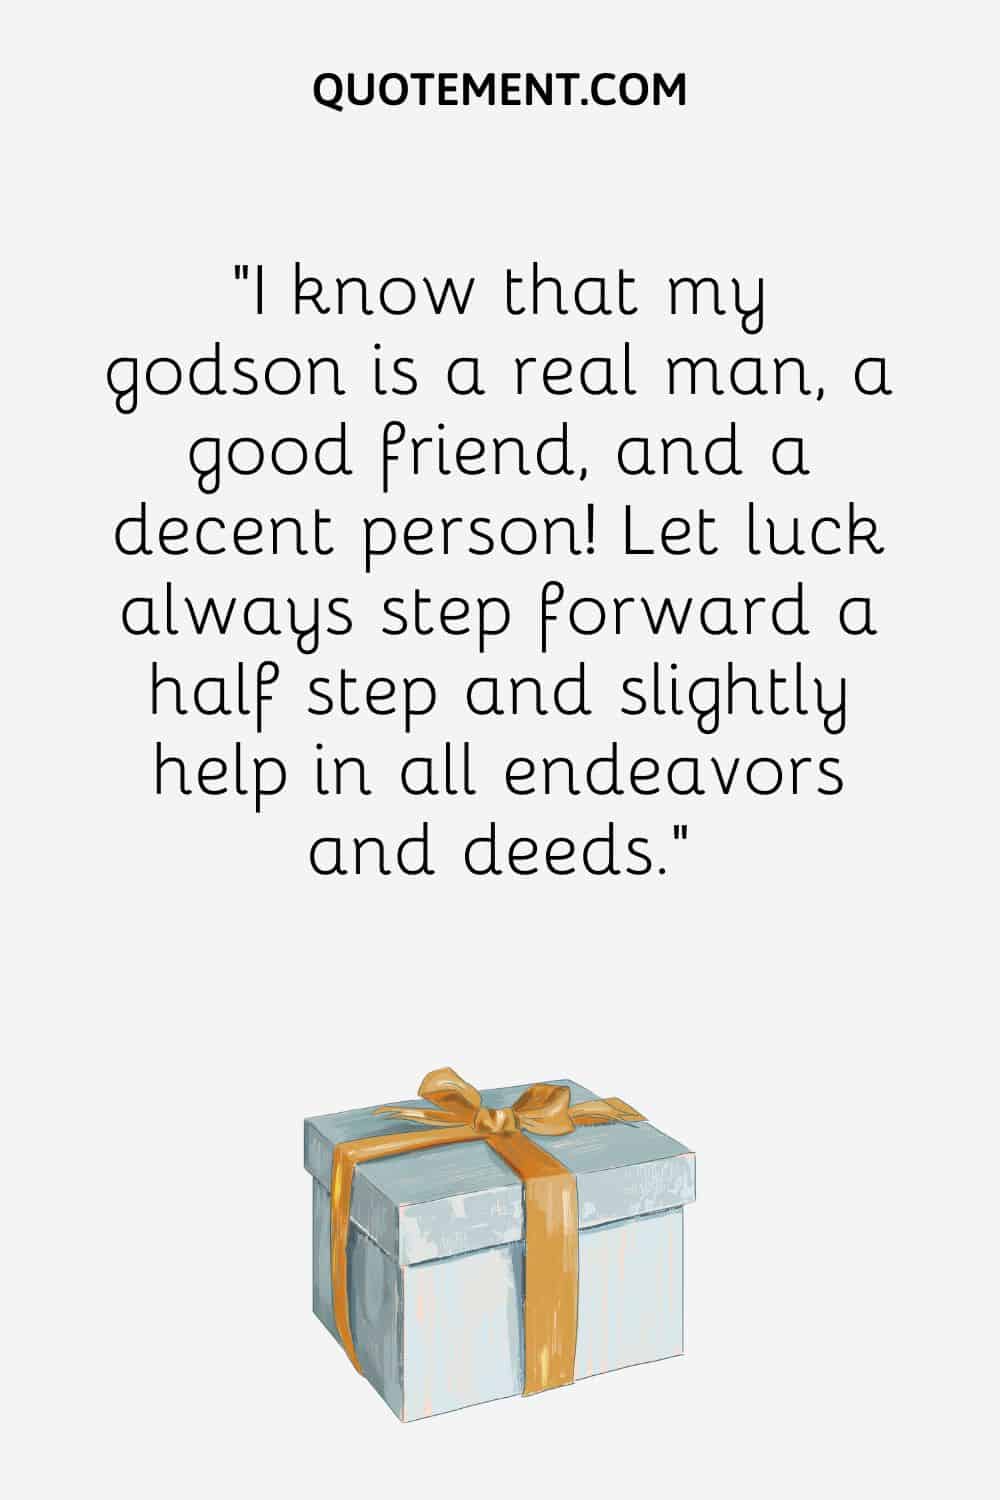 “I know that my godson is a real man, a good friend, and a decent person! Let luck always step forward a half step and slightly help in all endeavors and deeds.”